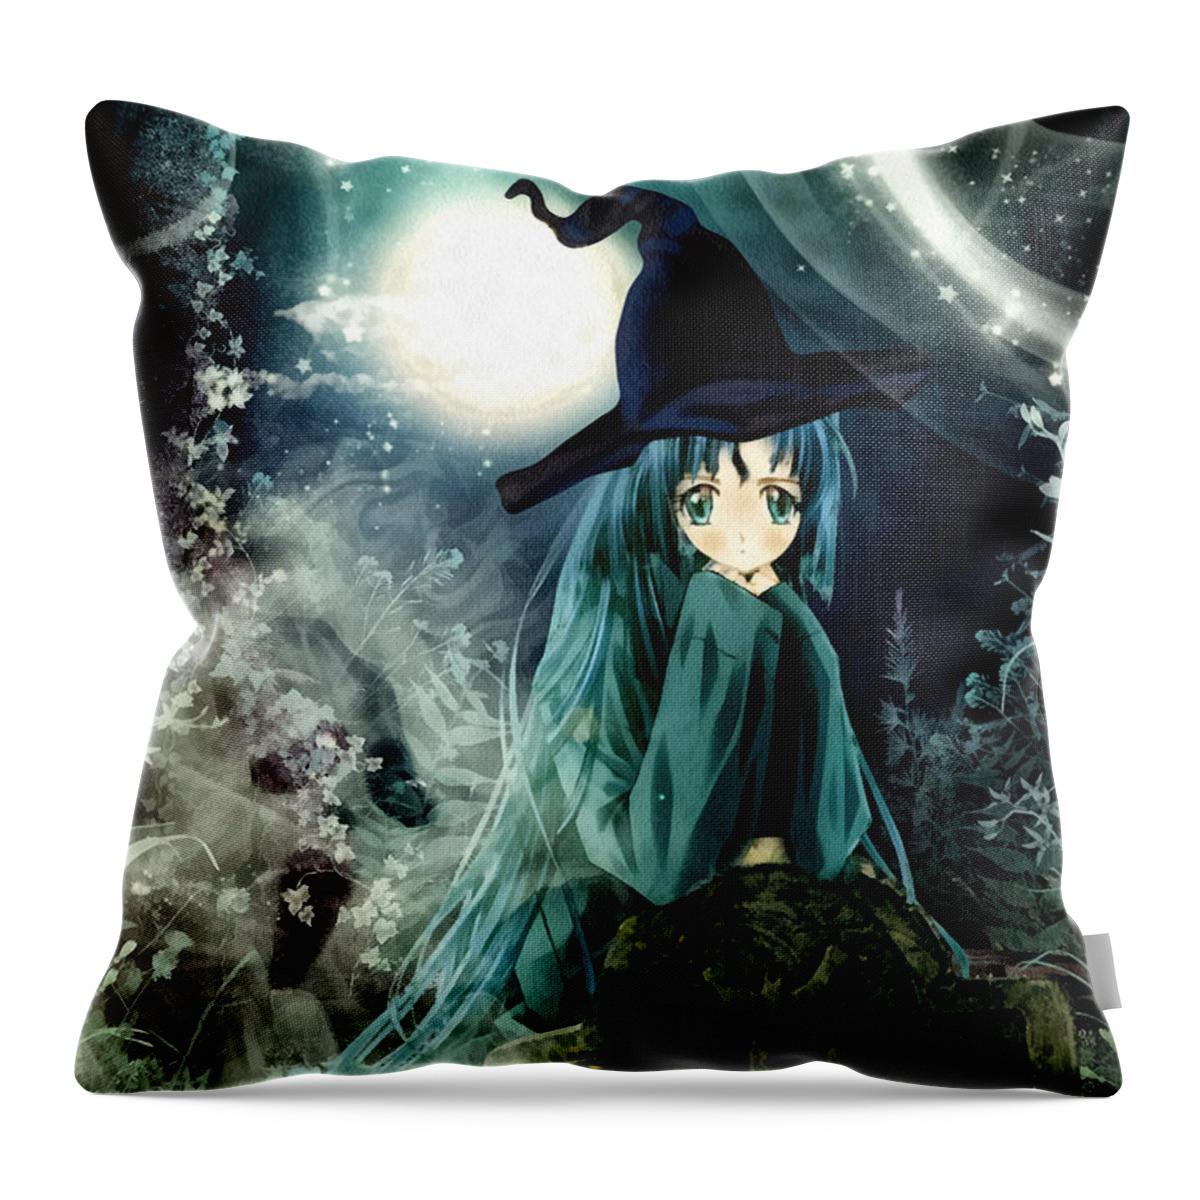 Spooky Night Throw Pillow featuring the painting Spooky Night by Mo T